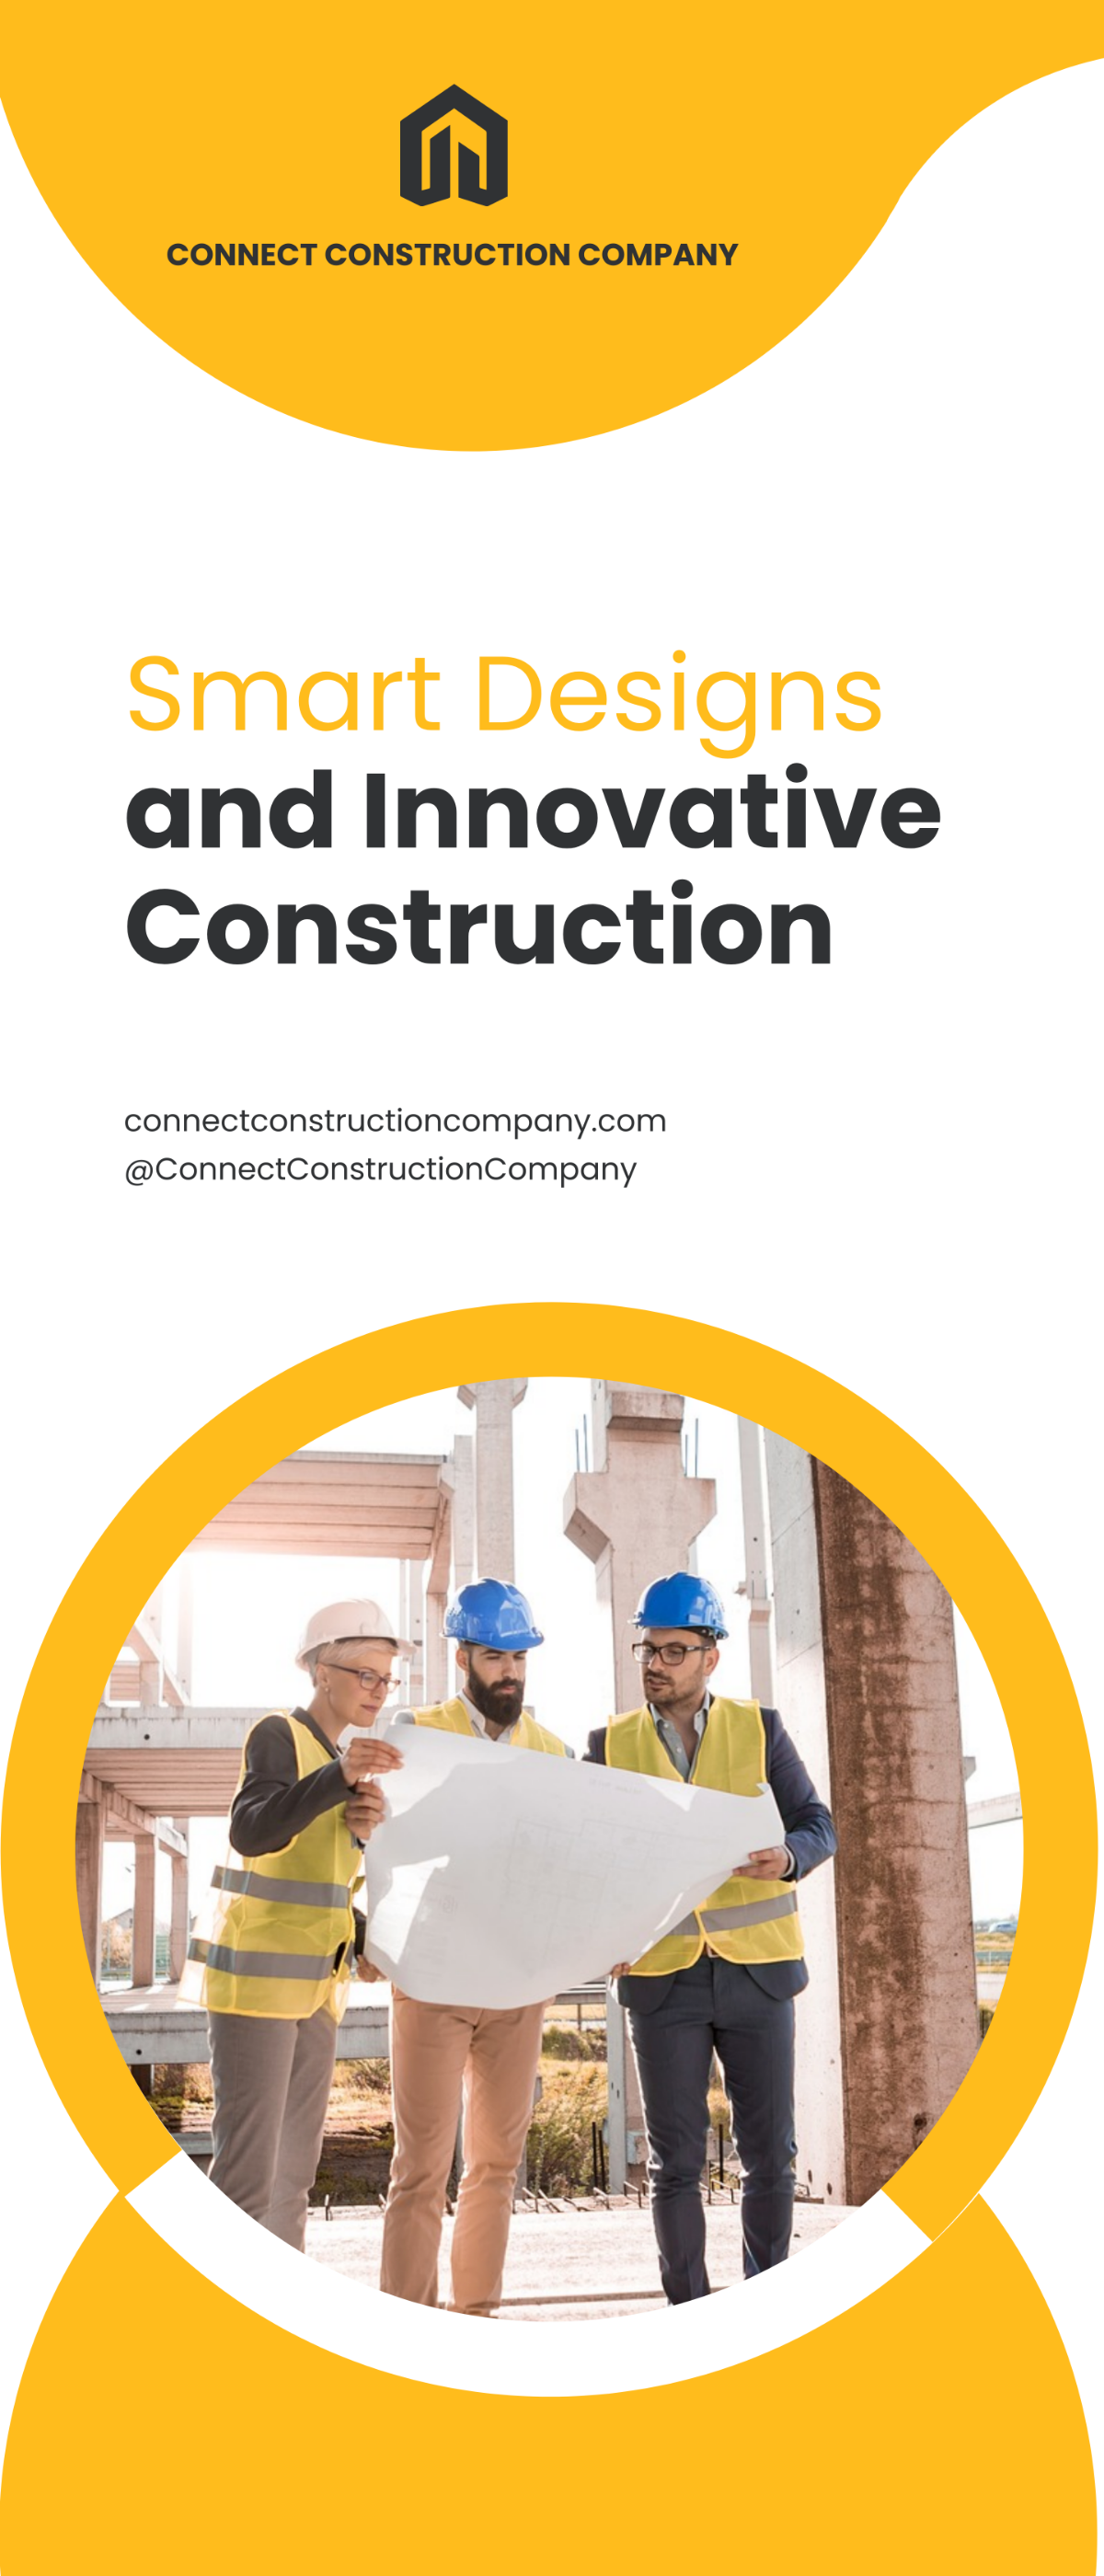 Creative Construction Roll Up Banner Template